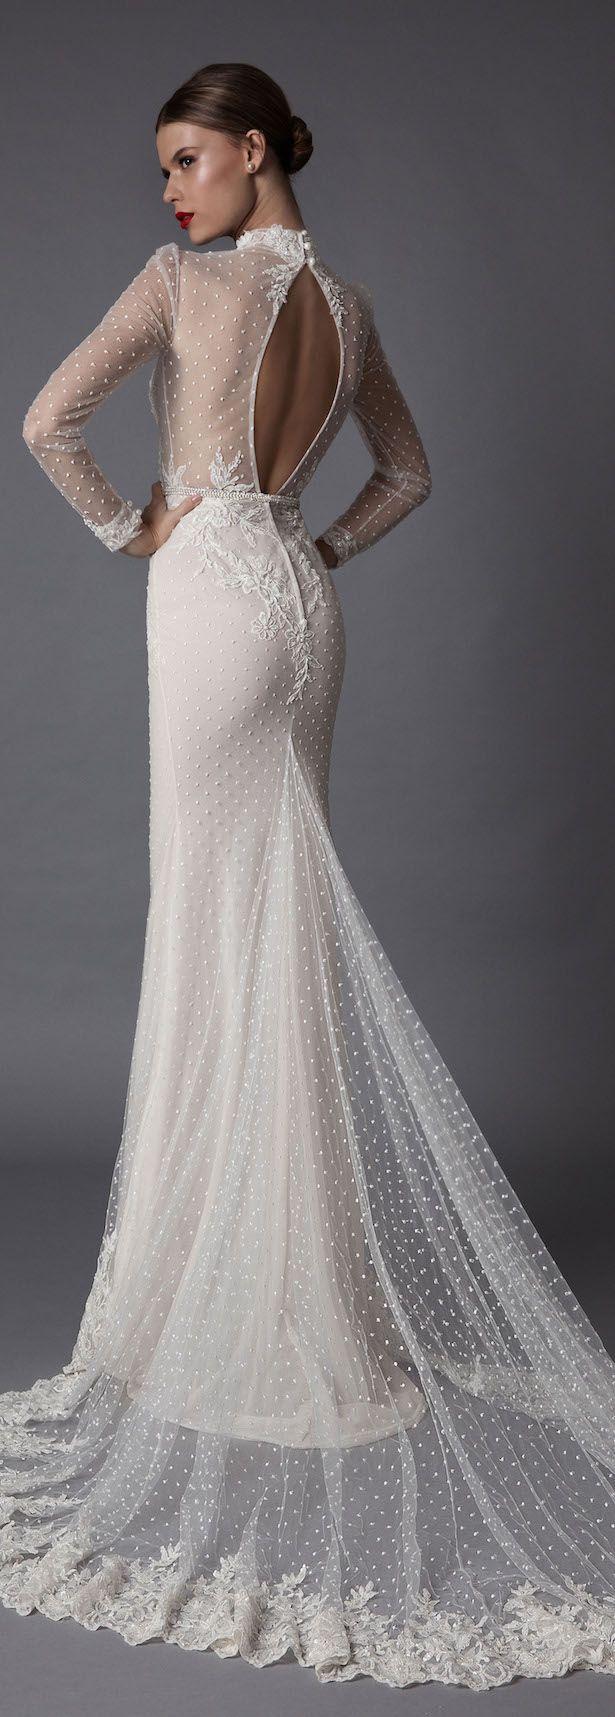 Wedding - MUSE By Berta Fall 2017 Bridal Collection